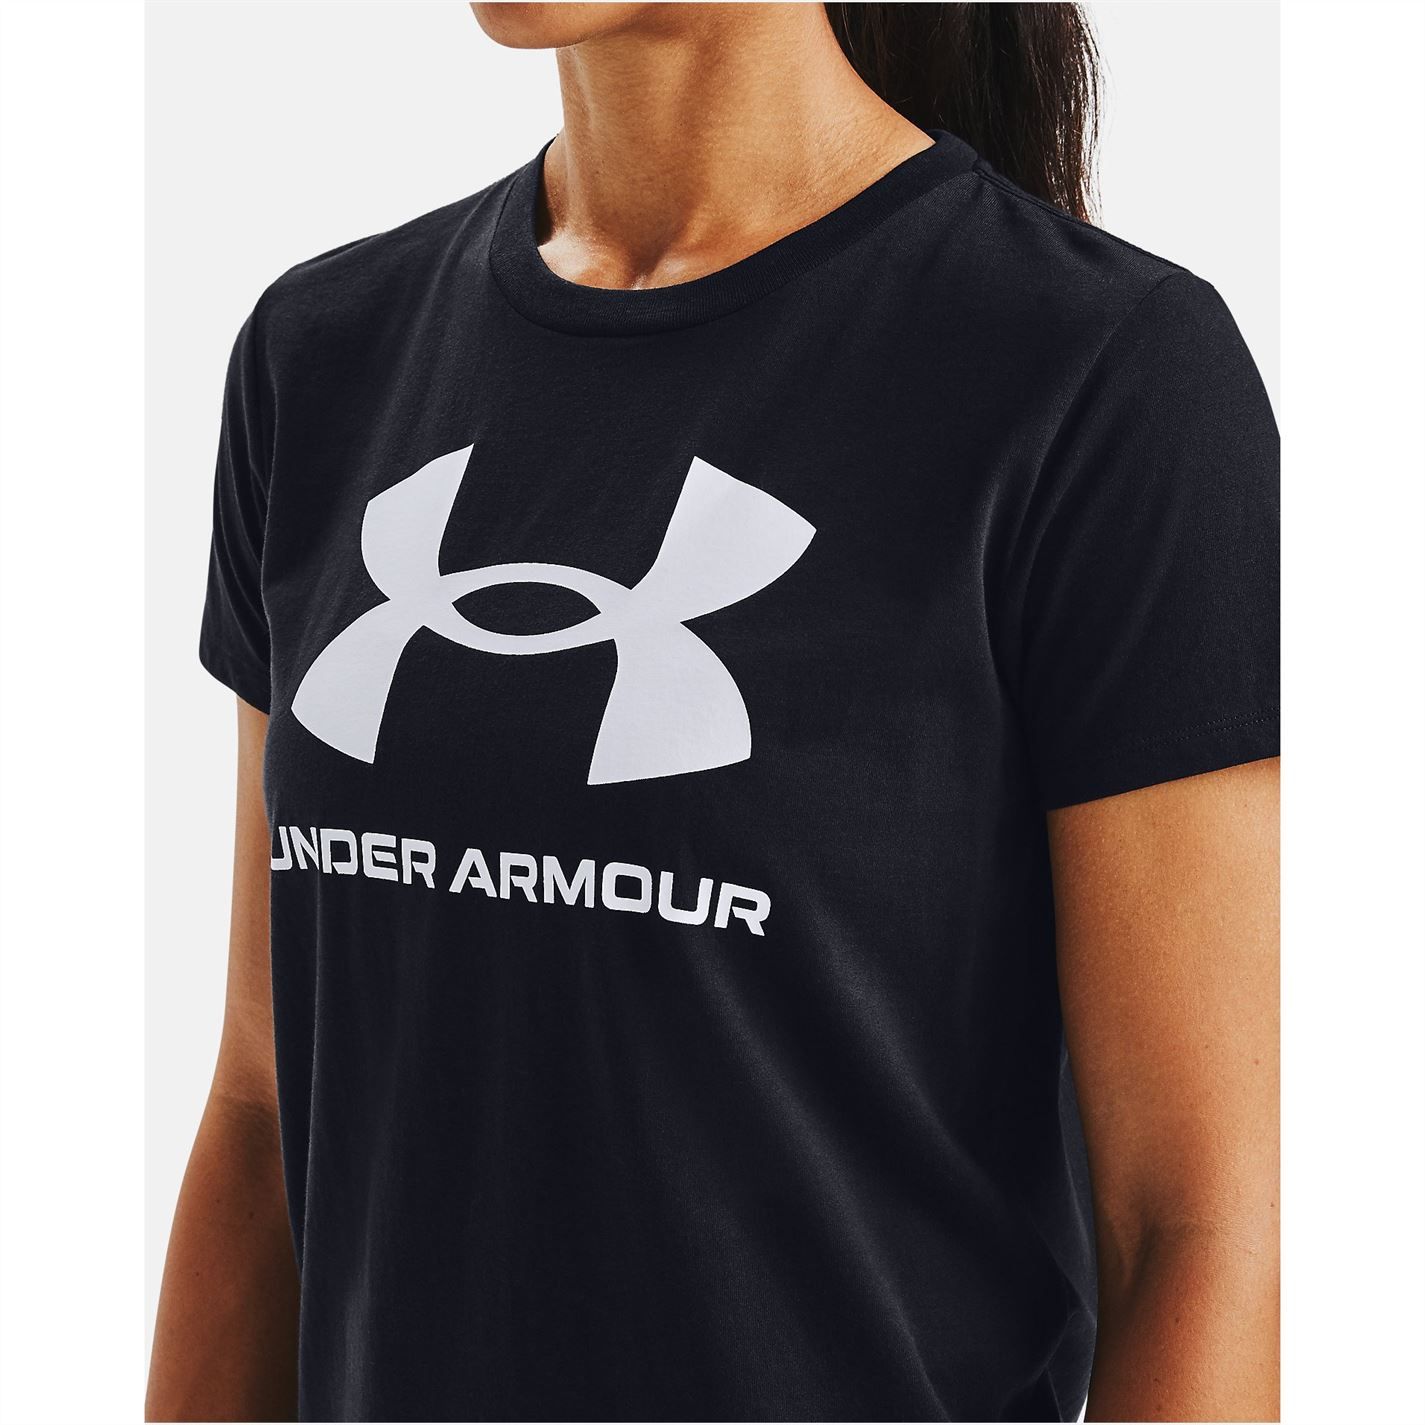 Under Armour Classic Crew T-Shirt Ladies - Upgrade your activewear or your casual wardrobe with this Under Armour Classic Crew T-Shirt which has been crafted using sweat-wicking fabric in order to keep your skin dry and your body cool as your push yourself during a workout. The tee is cut in a classic T-Shirt style with a crew neck and short sleeves, with the design dominated by the large print Under Armour branding across the chest.